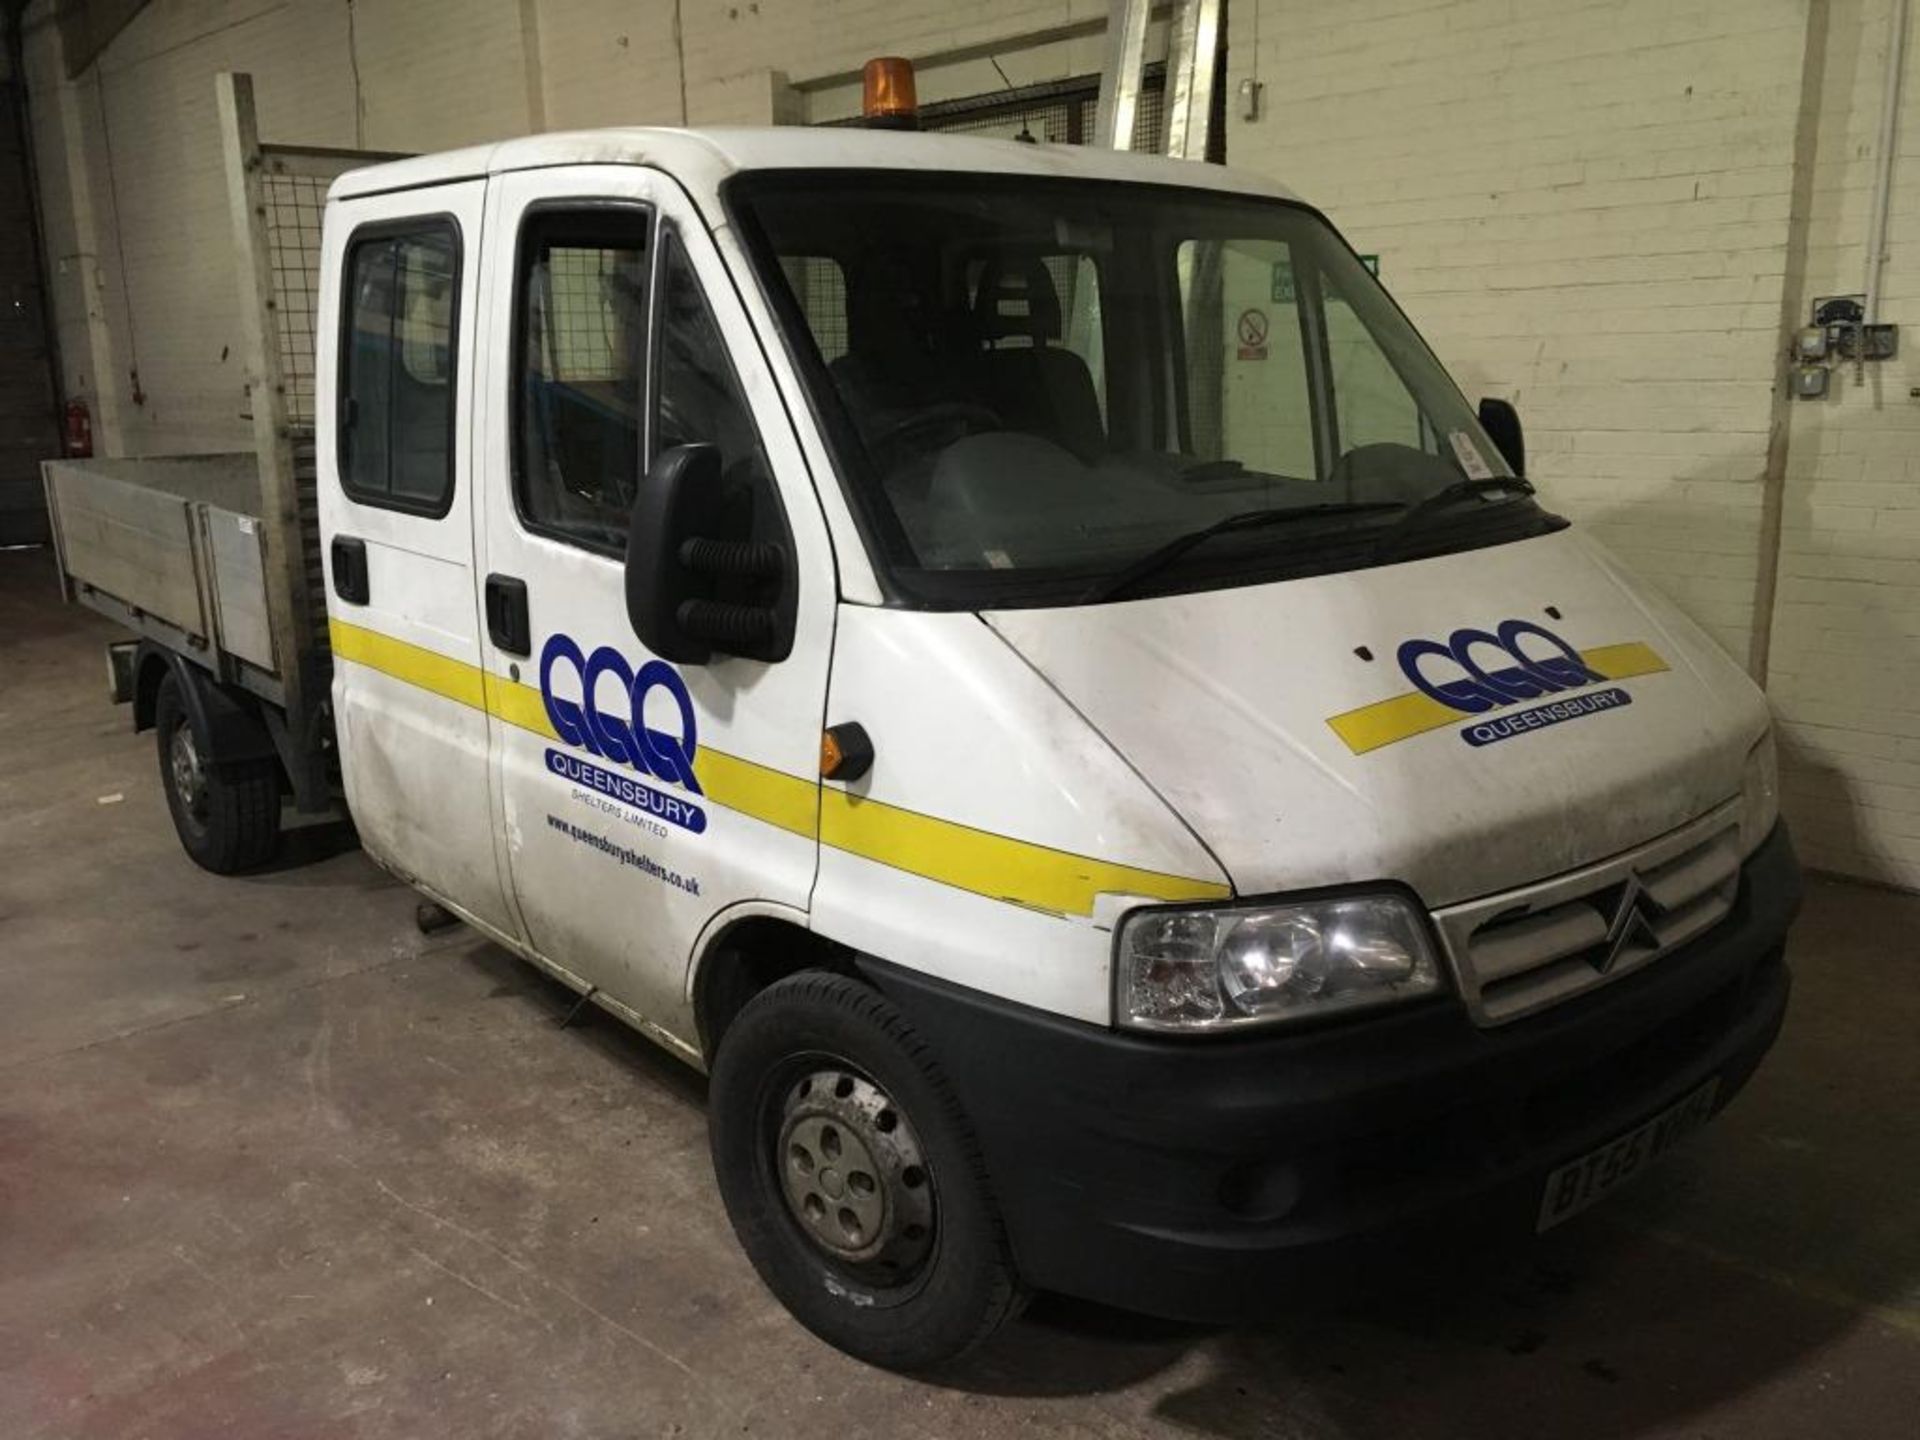 Citroen Relay 1800 TD HDI LWB double cab flat bed van, (rear seats removed) with swing lift V